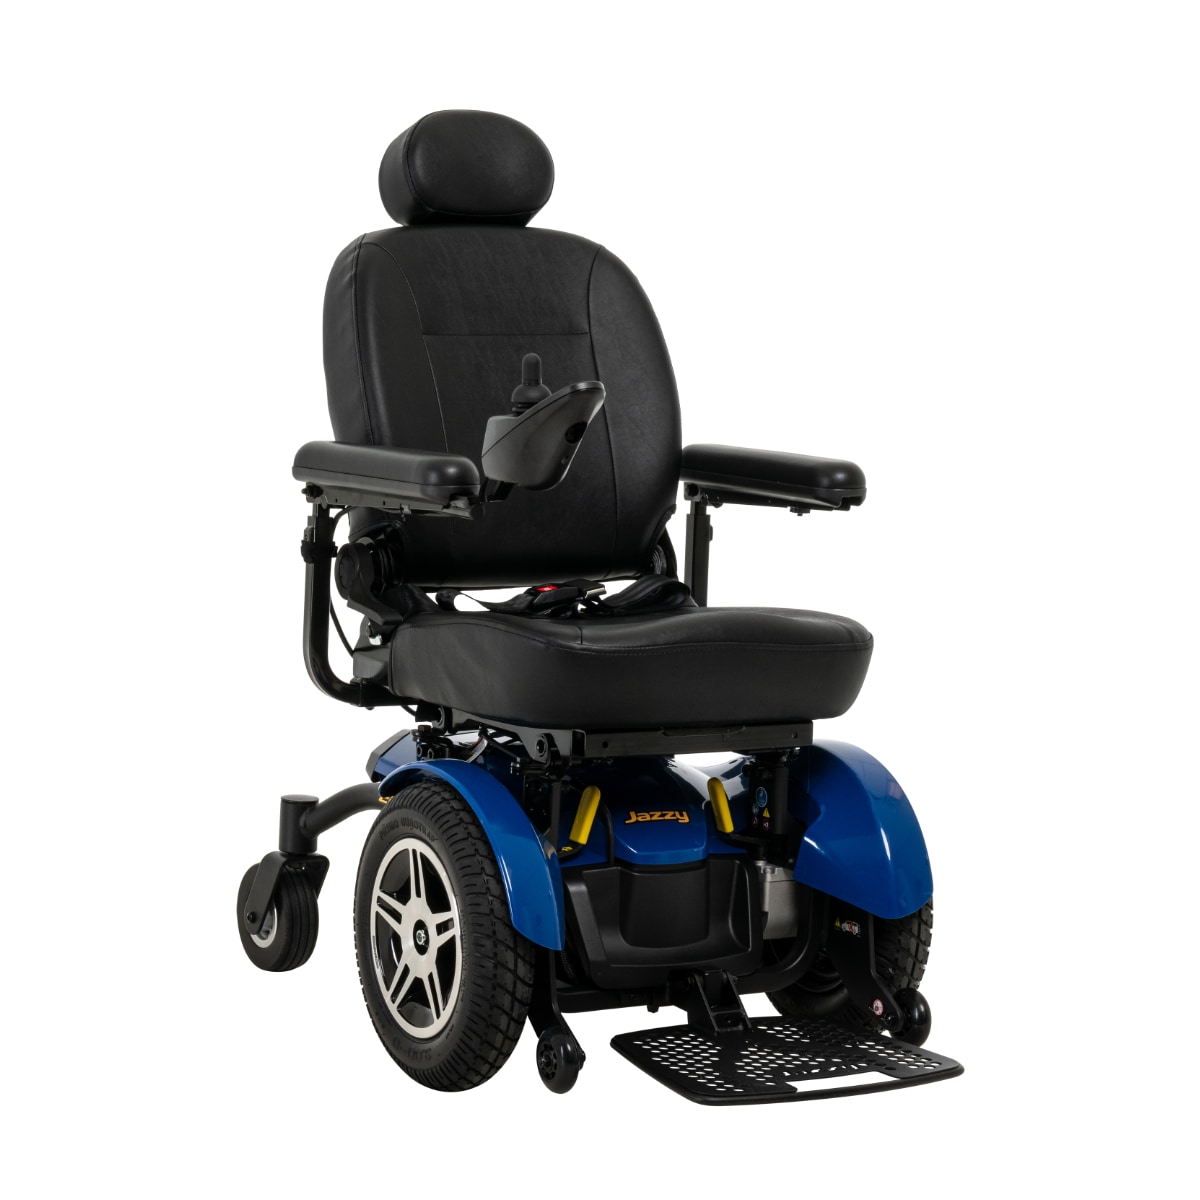 Power chair with black captain's chair and a blue base and larger control module